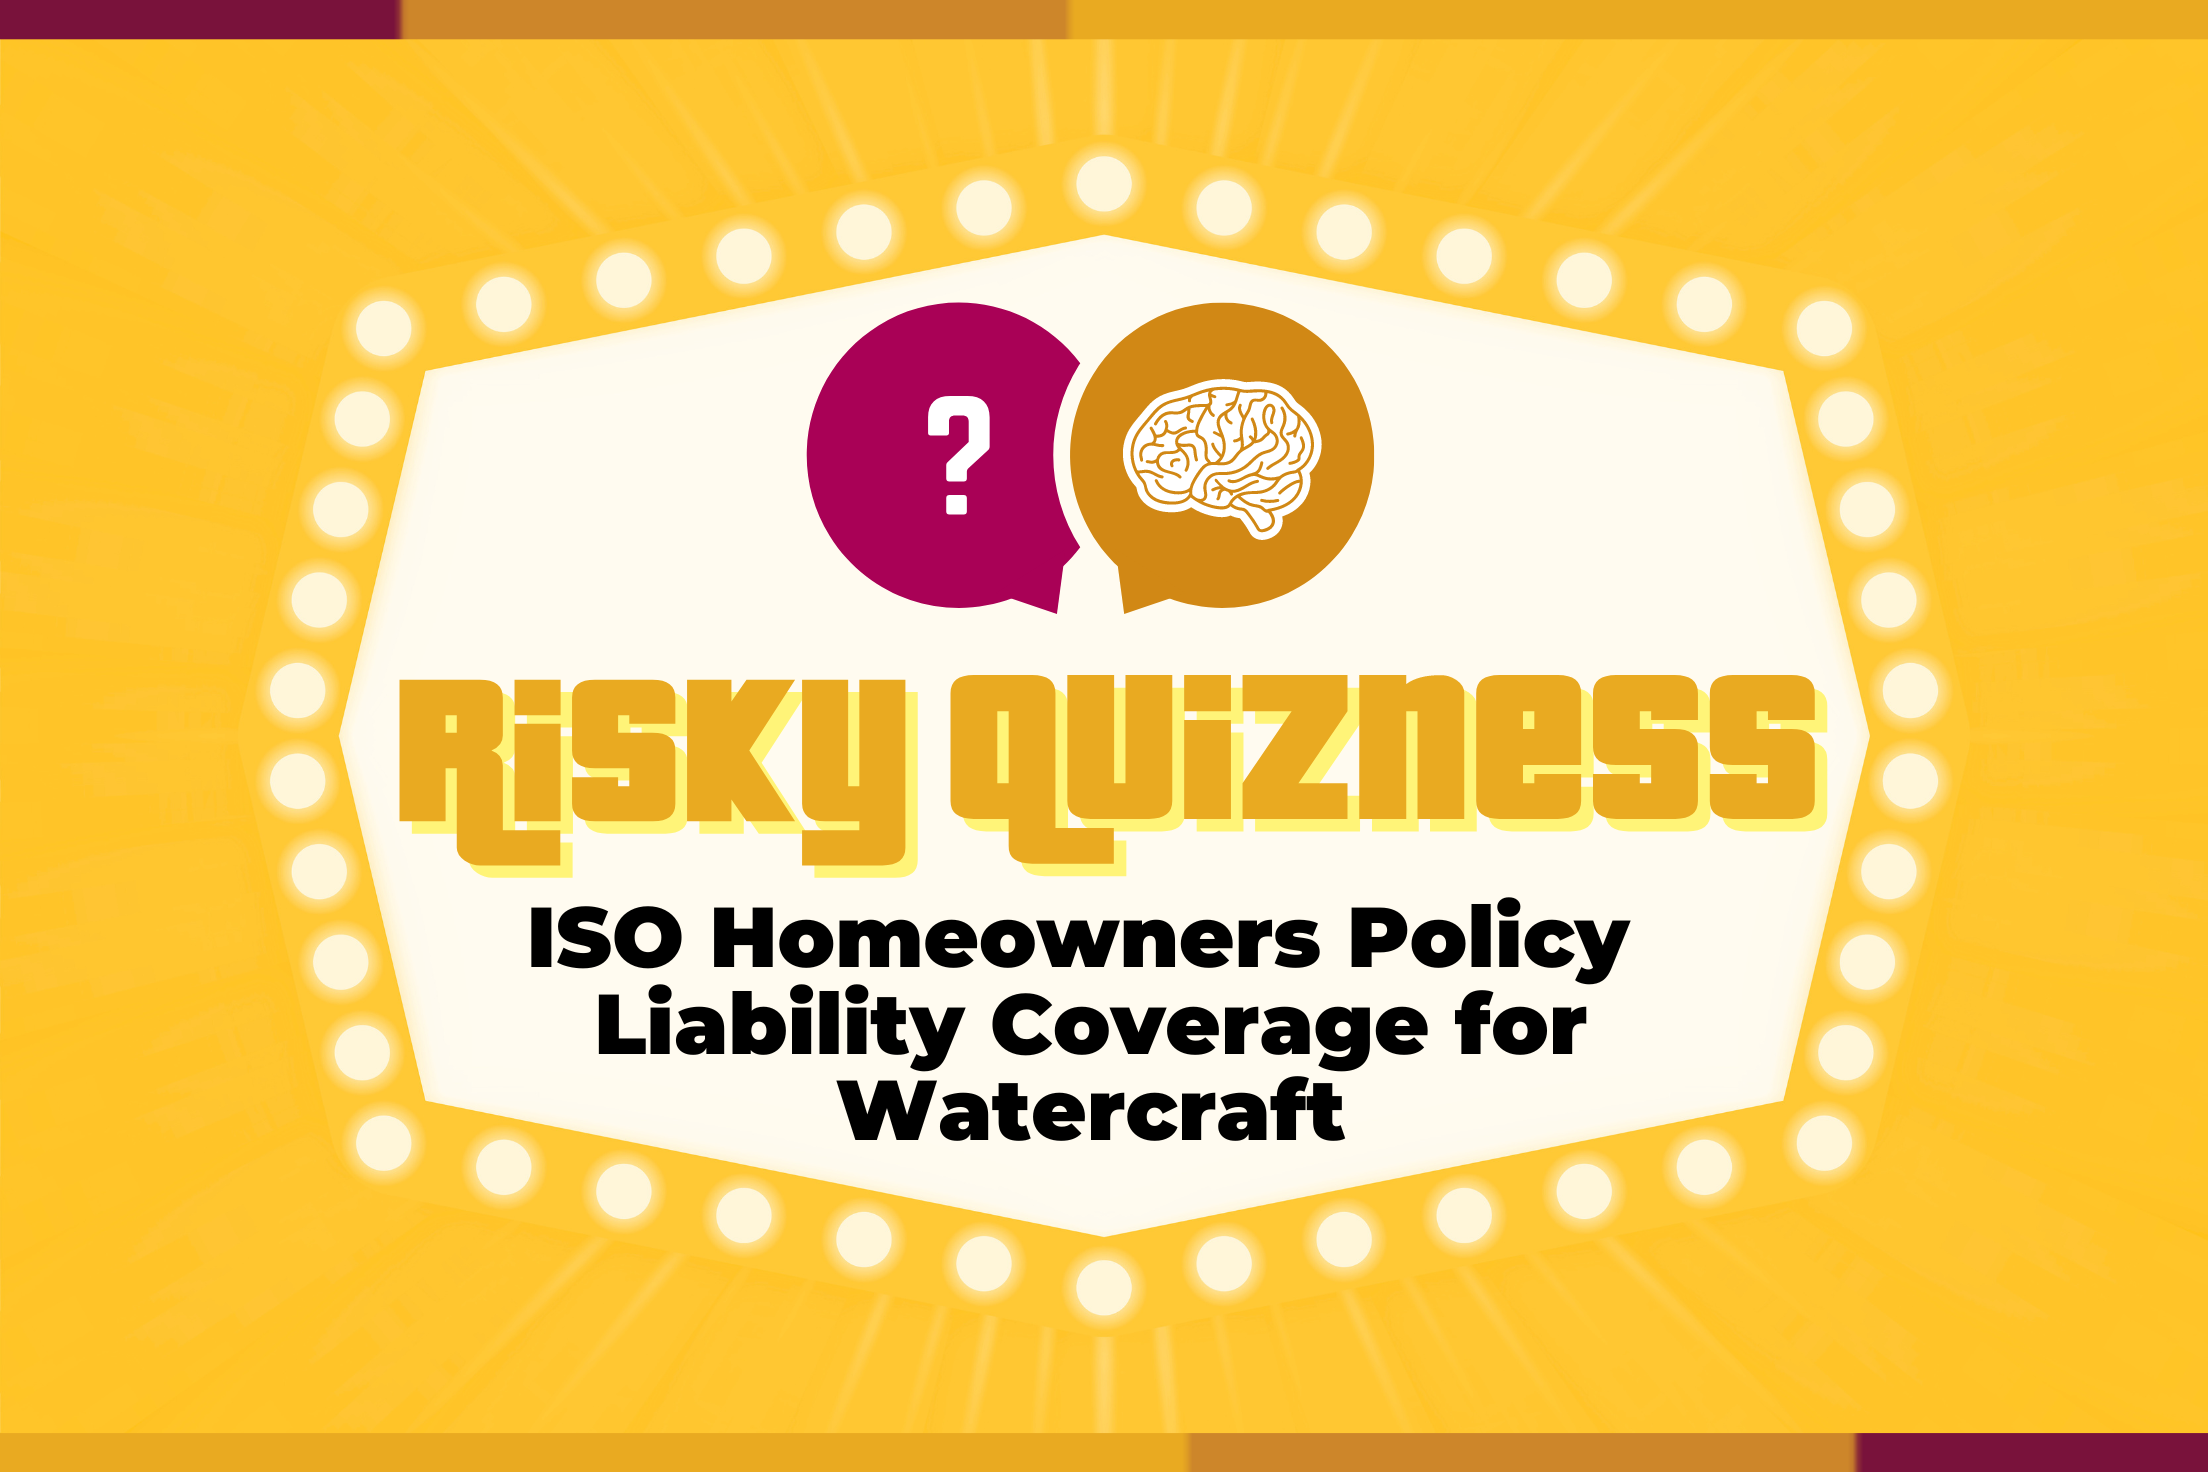 ISO Homeowners Policy Liability Coverage for Watercraft